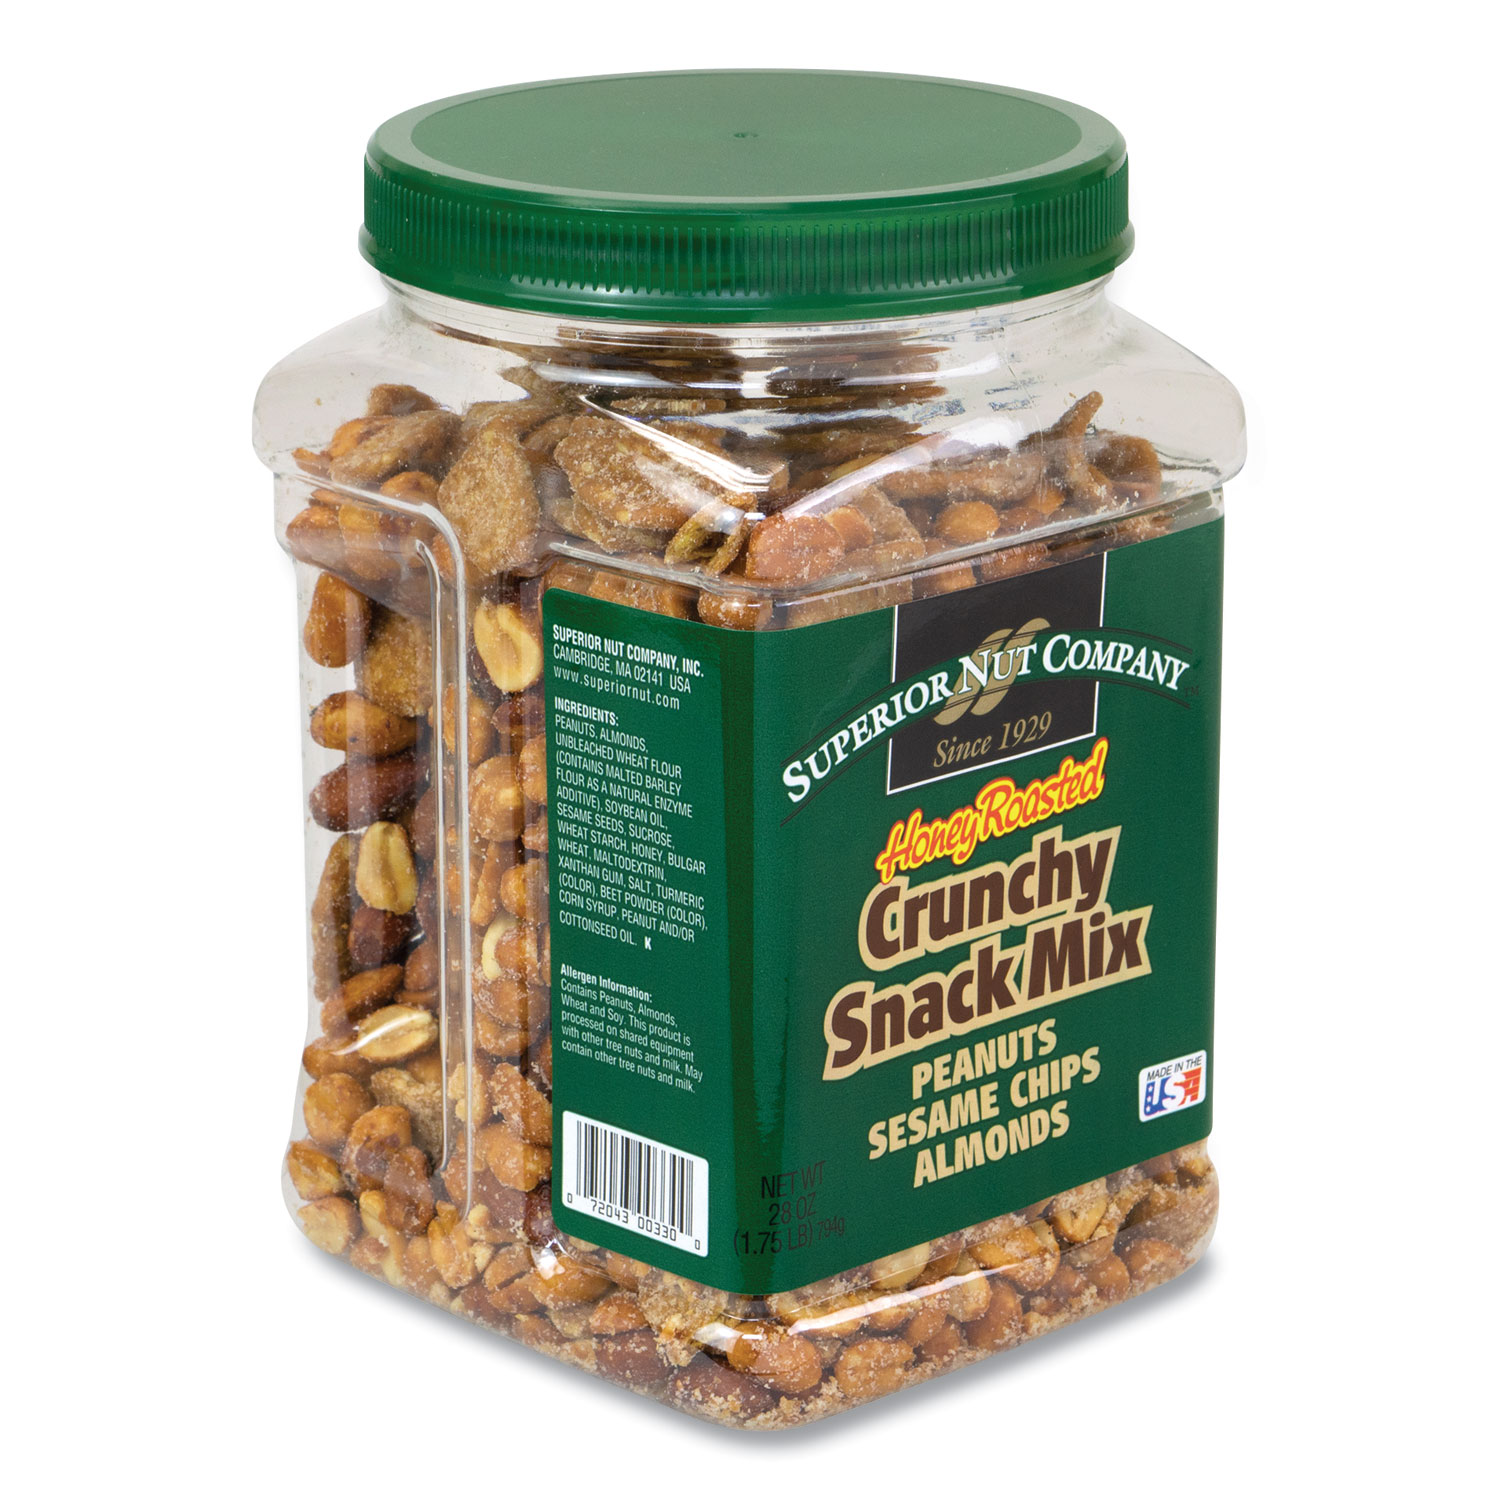  Superior Nut Company 330 Honey Roasted Crunch Snack Mix, 28 oz Tub, Free Delivery in 1-4 Business Days (GRR25900013) 